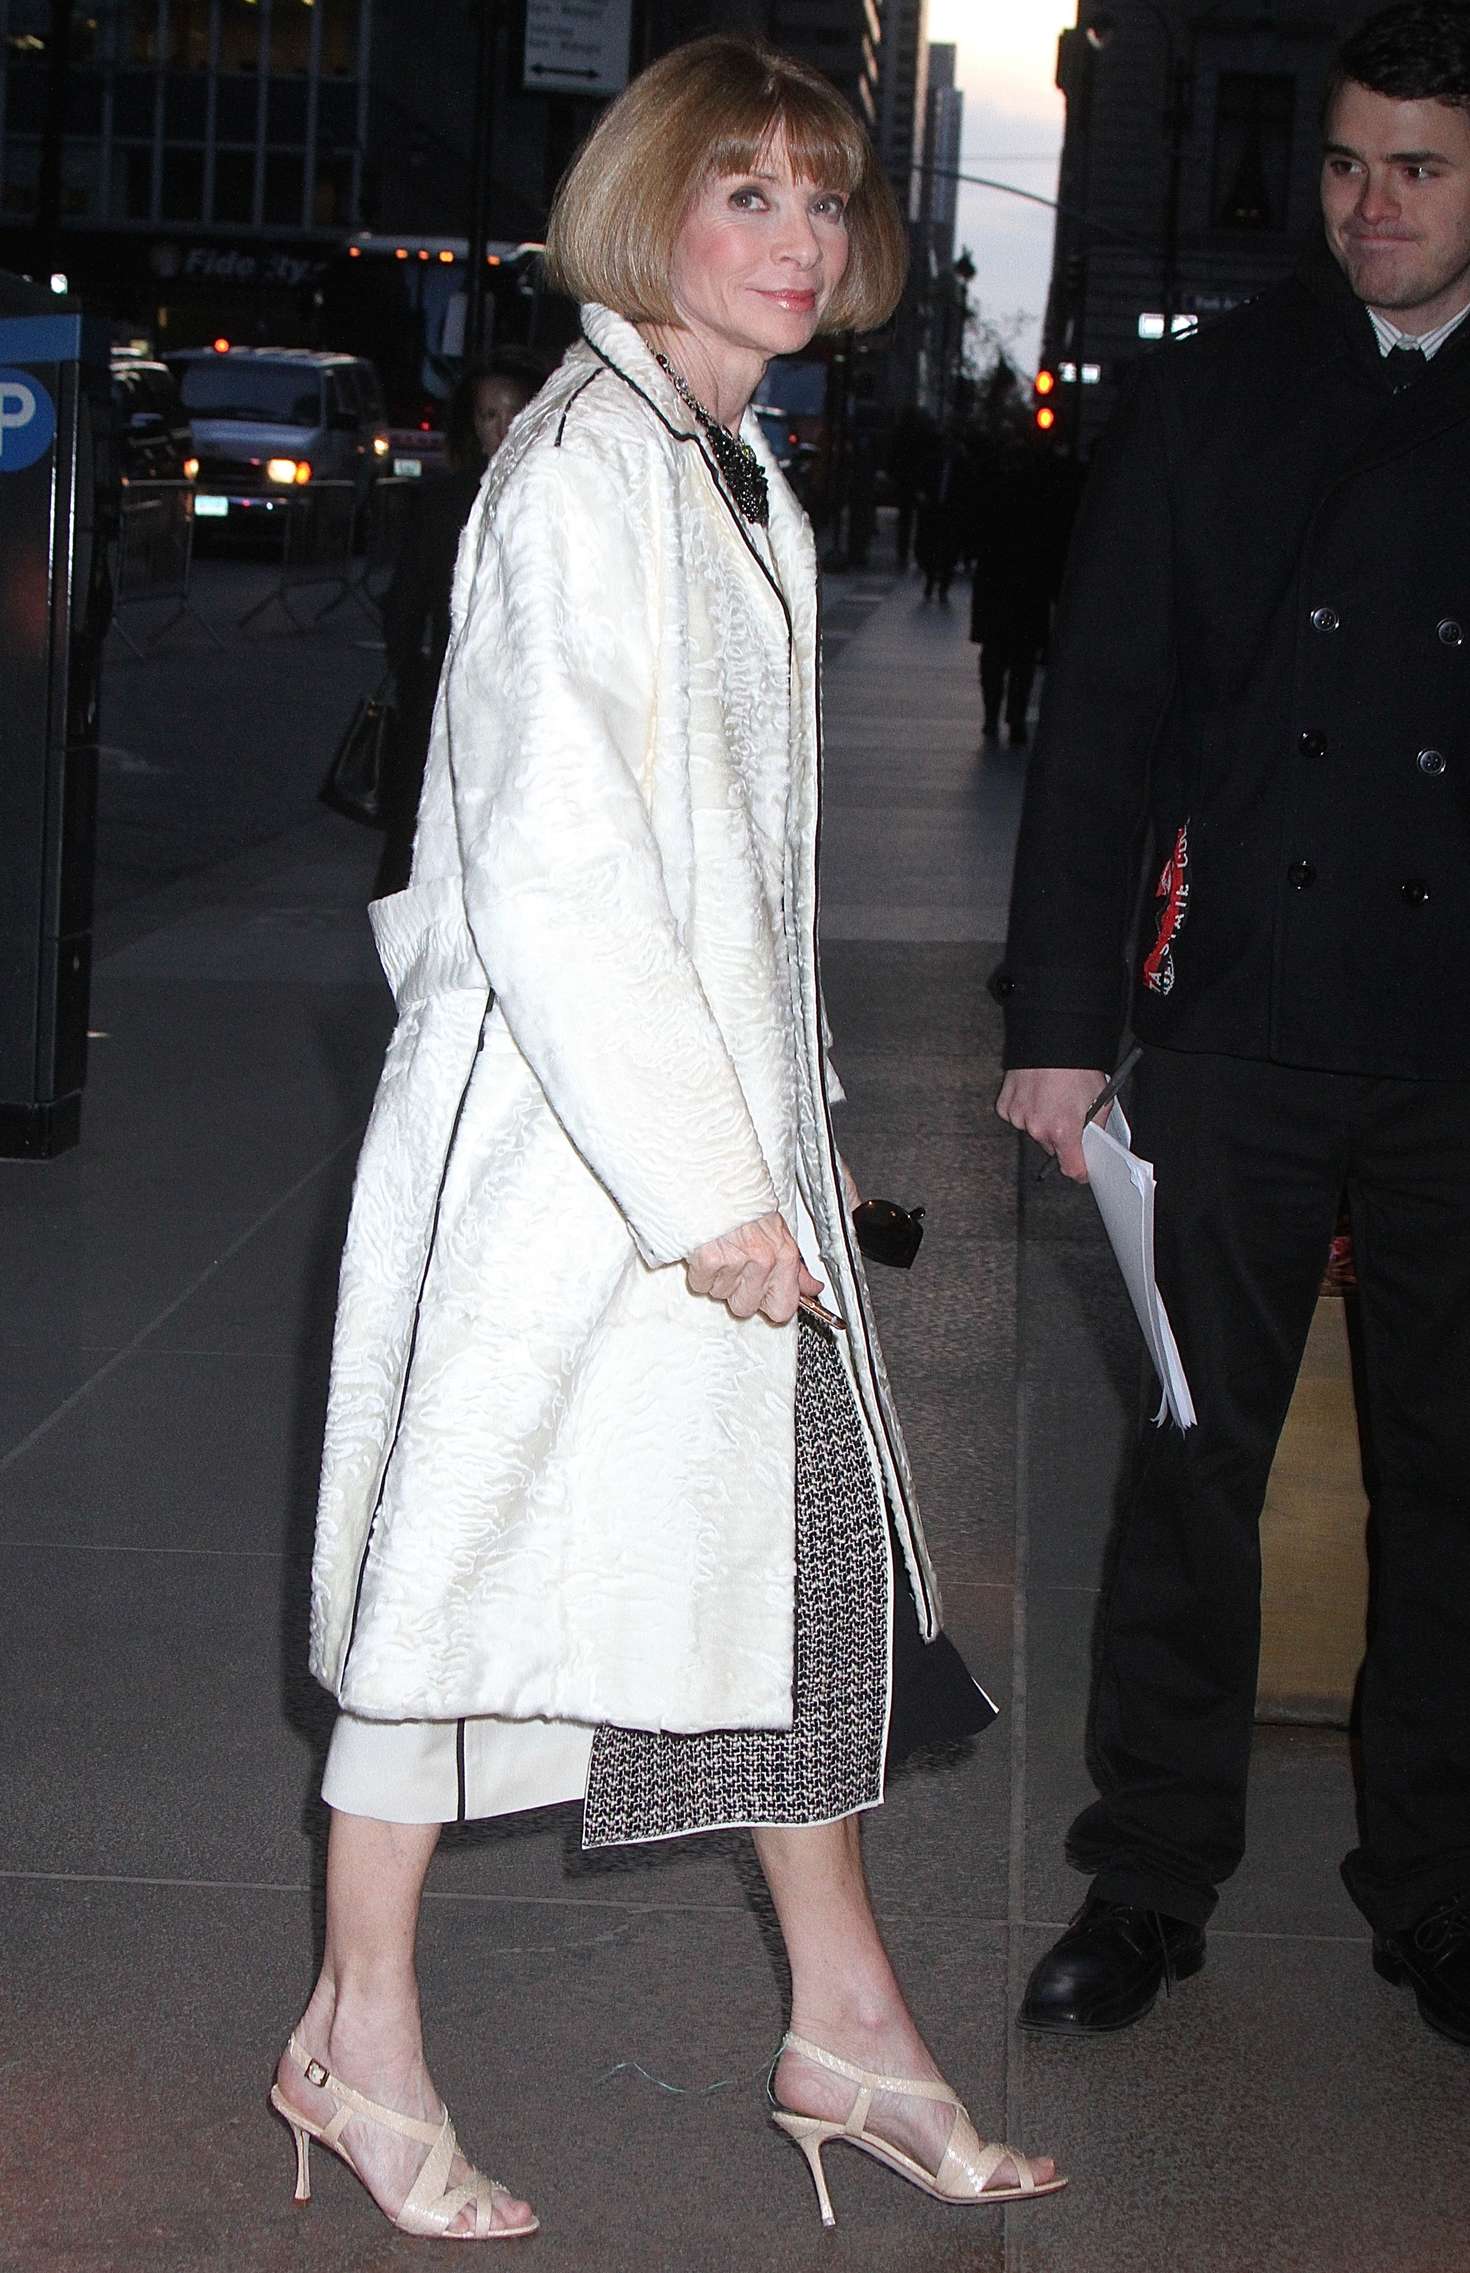 Anna Wintour Hollywood Reporters Most Powerful People in Media Event in New York